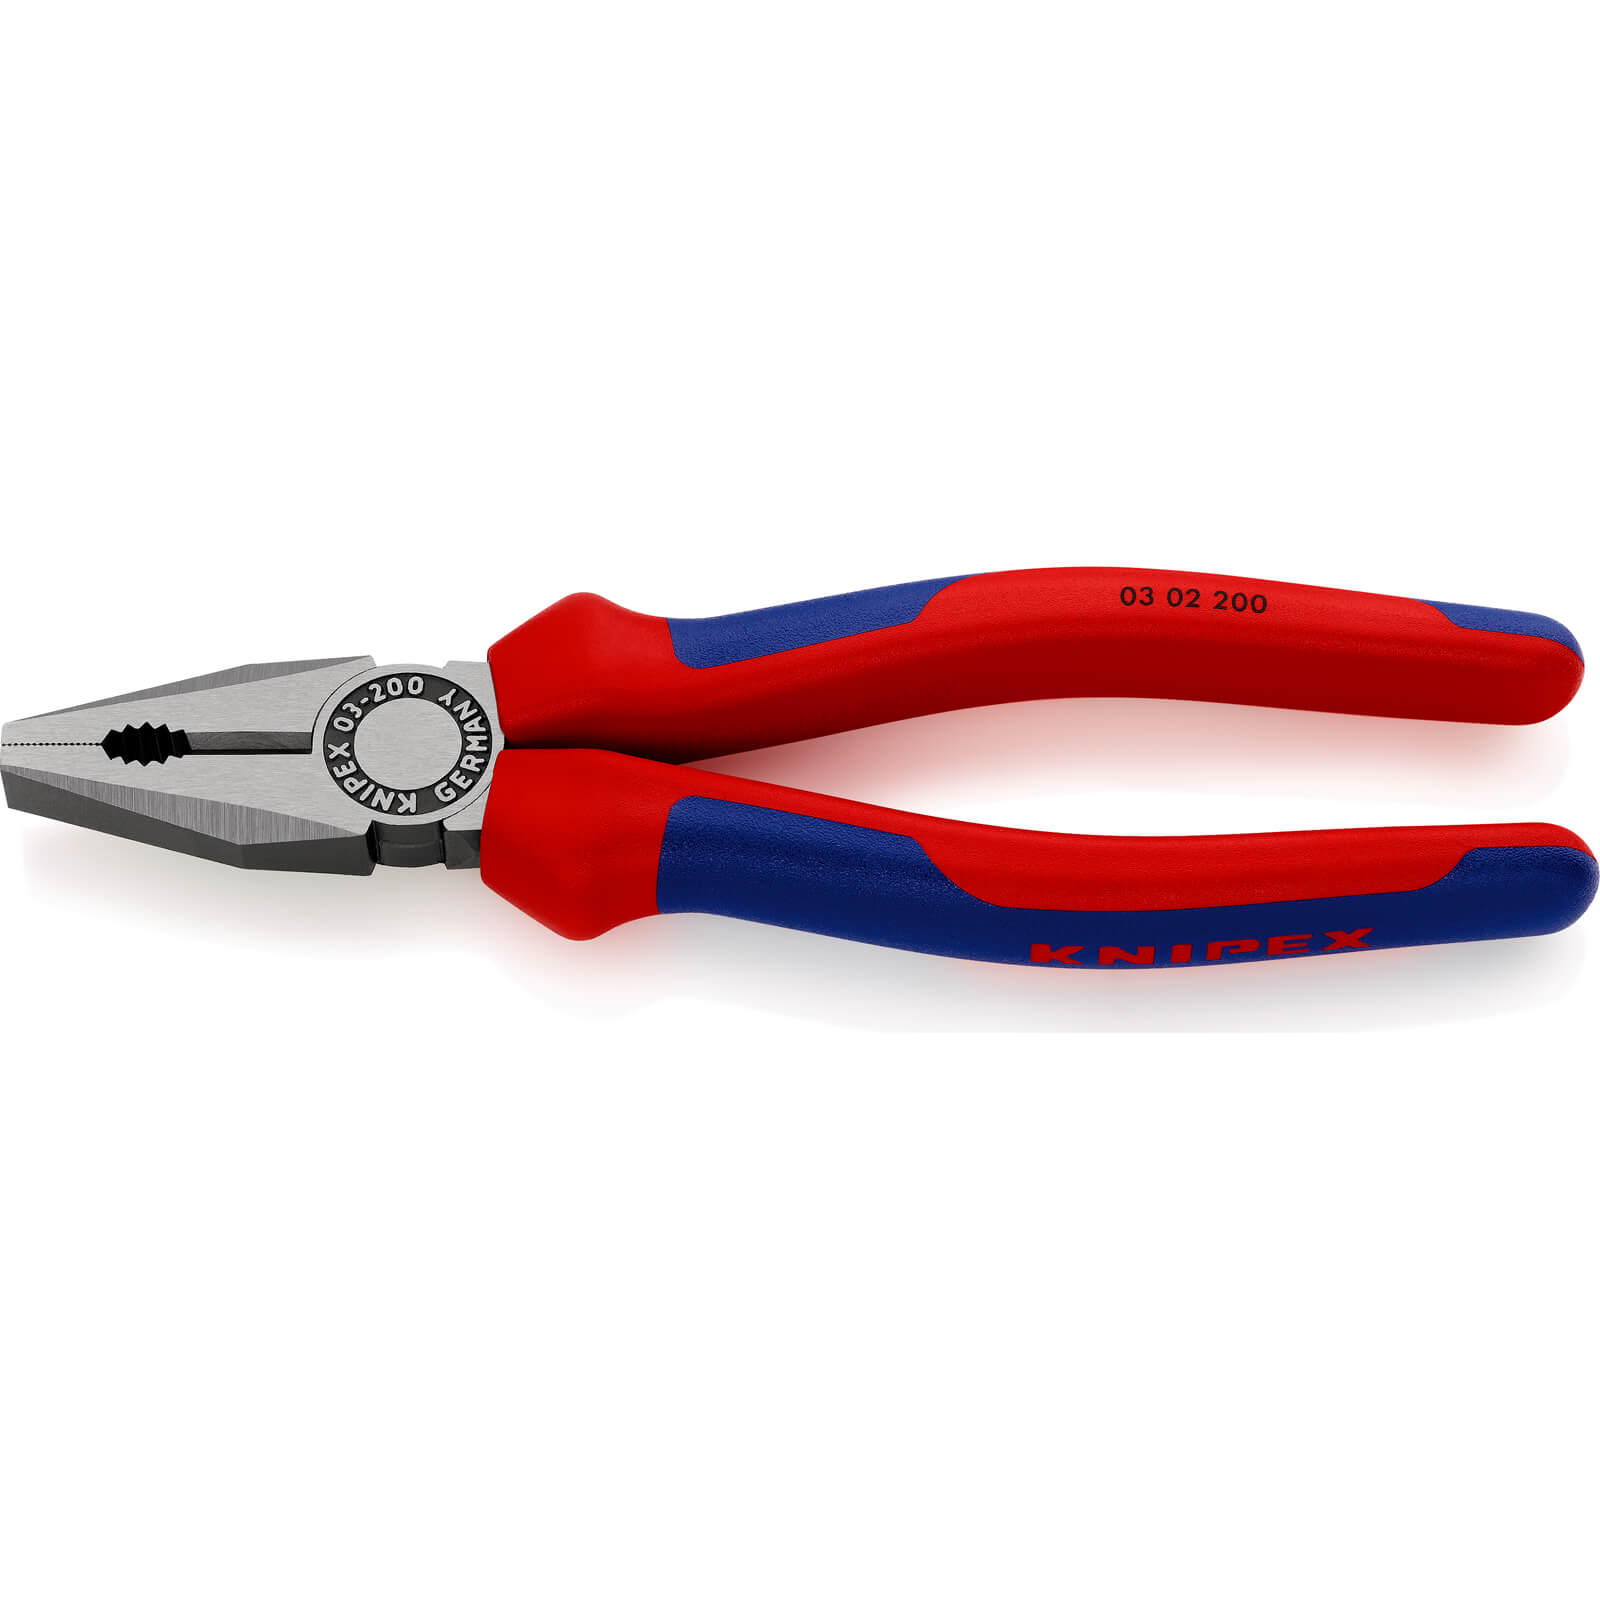 Photo of Knipex 03 02 Combination Pliers 200mm